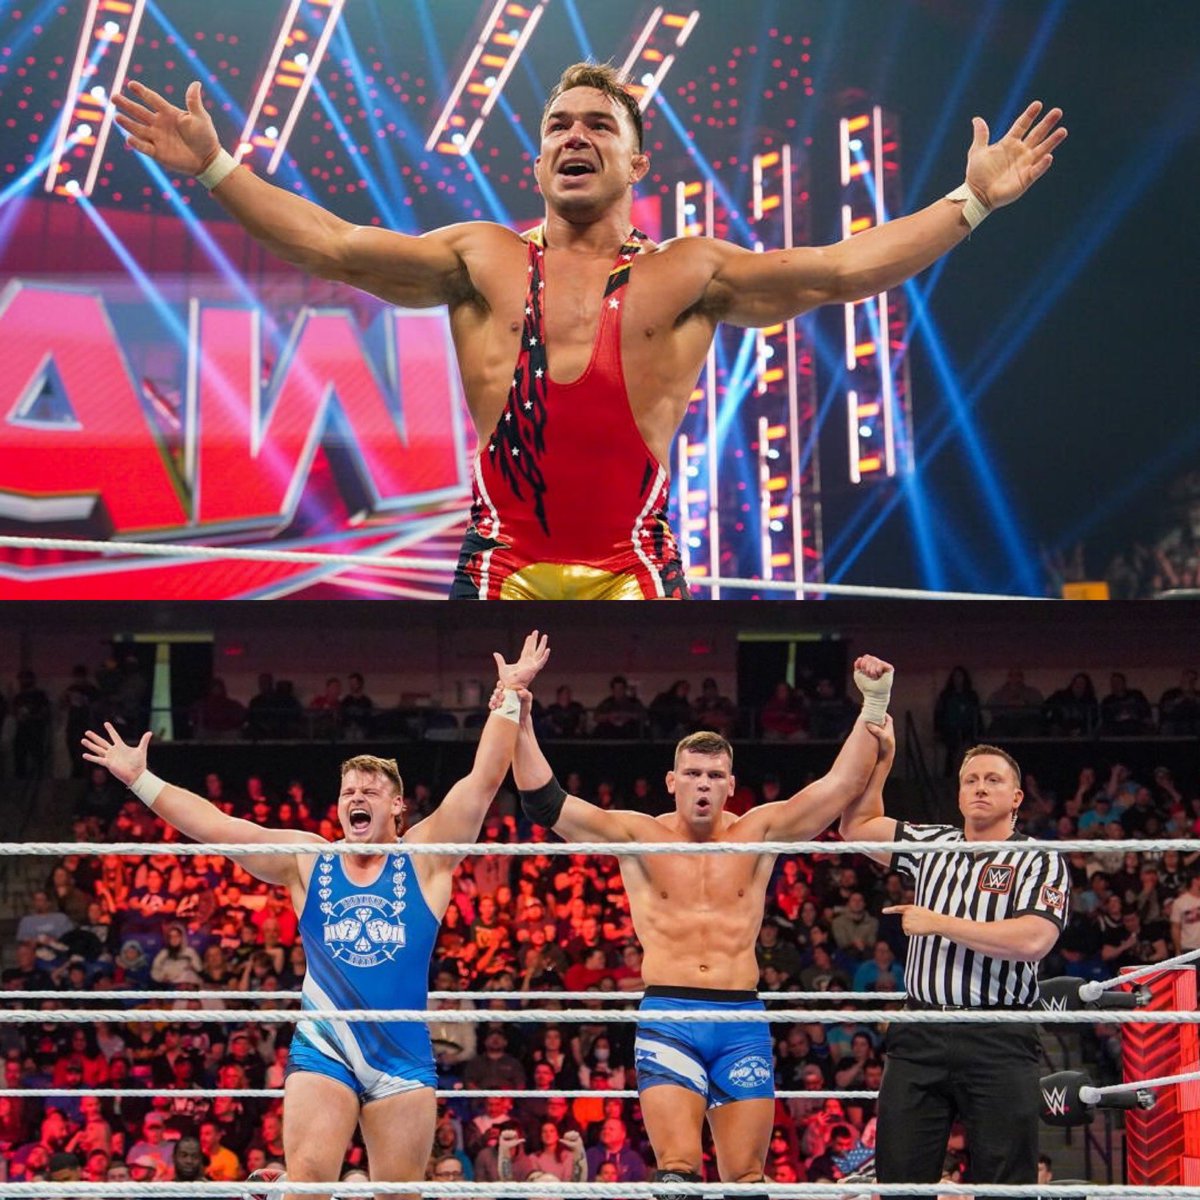 Chad Gable & The Creed Brothers are believed to be joining forces as heels. — WON